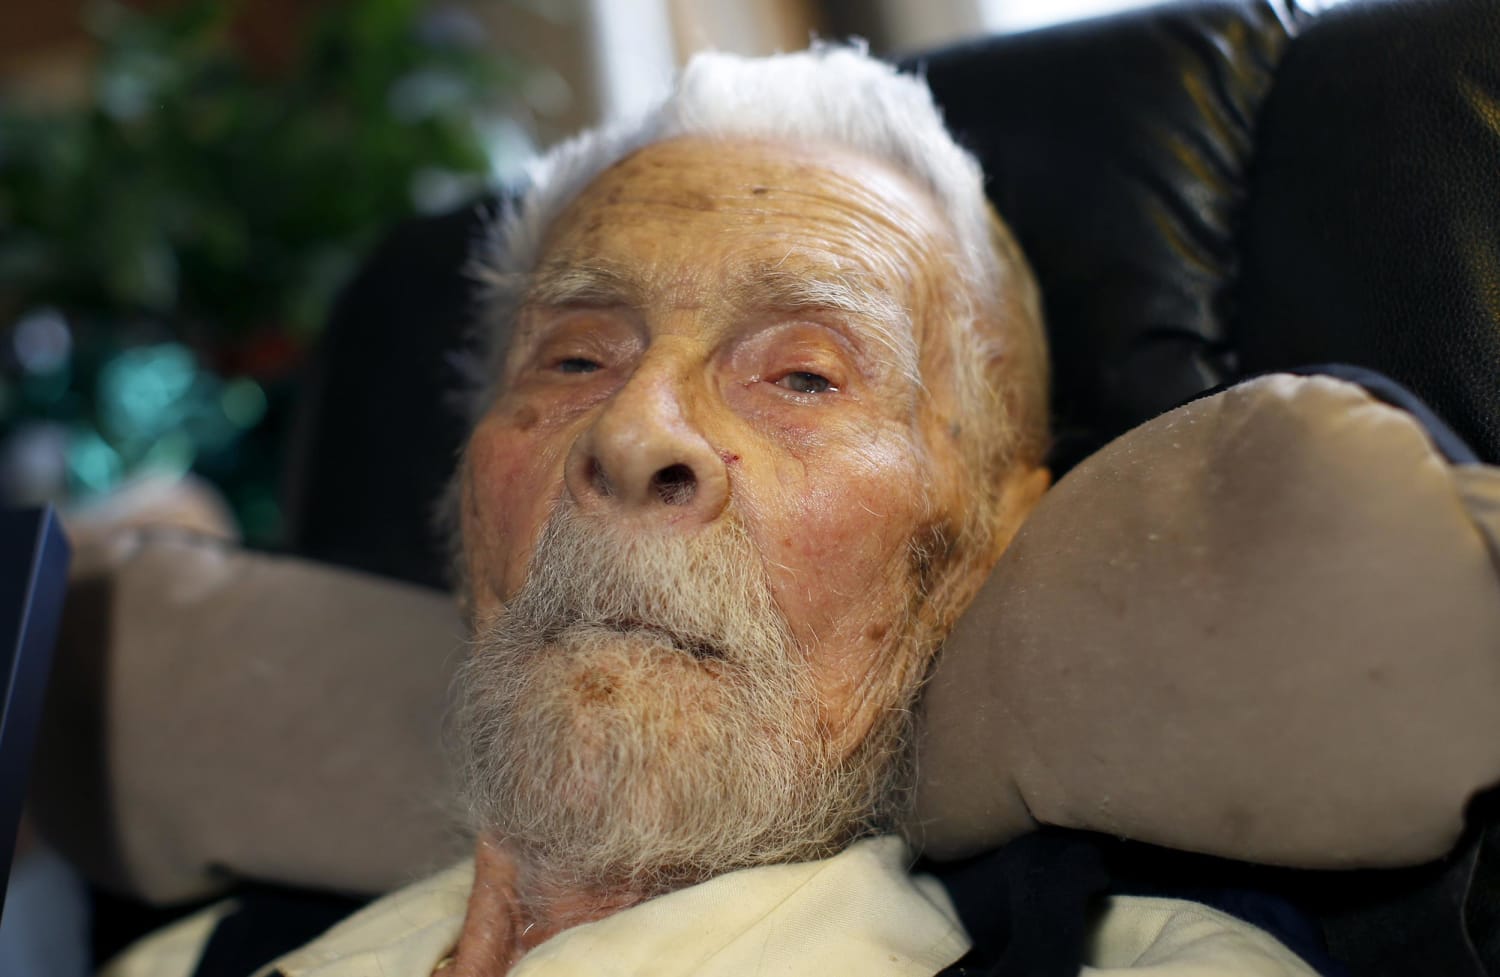 Oldest Man in the World Dies in New York at 111 - NBC News